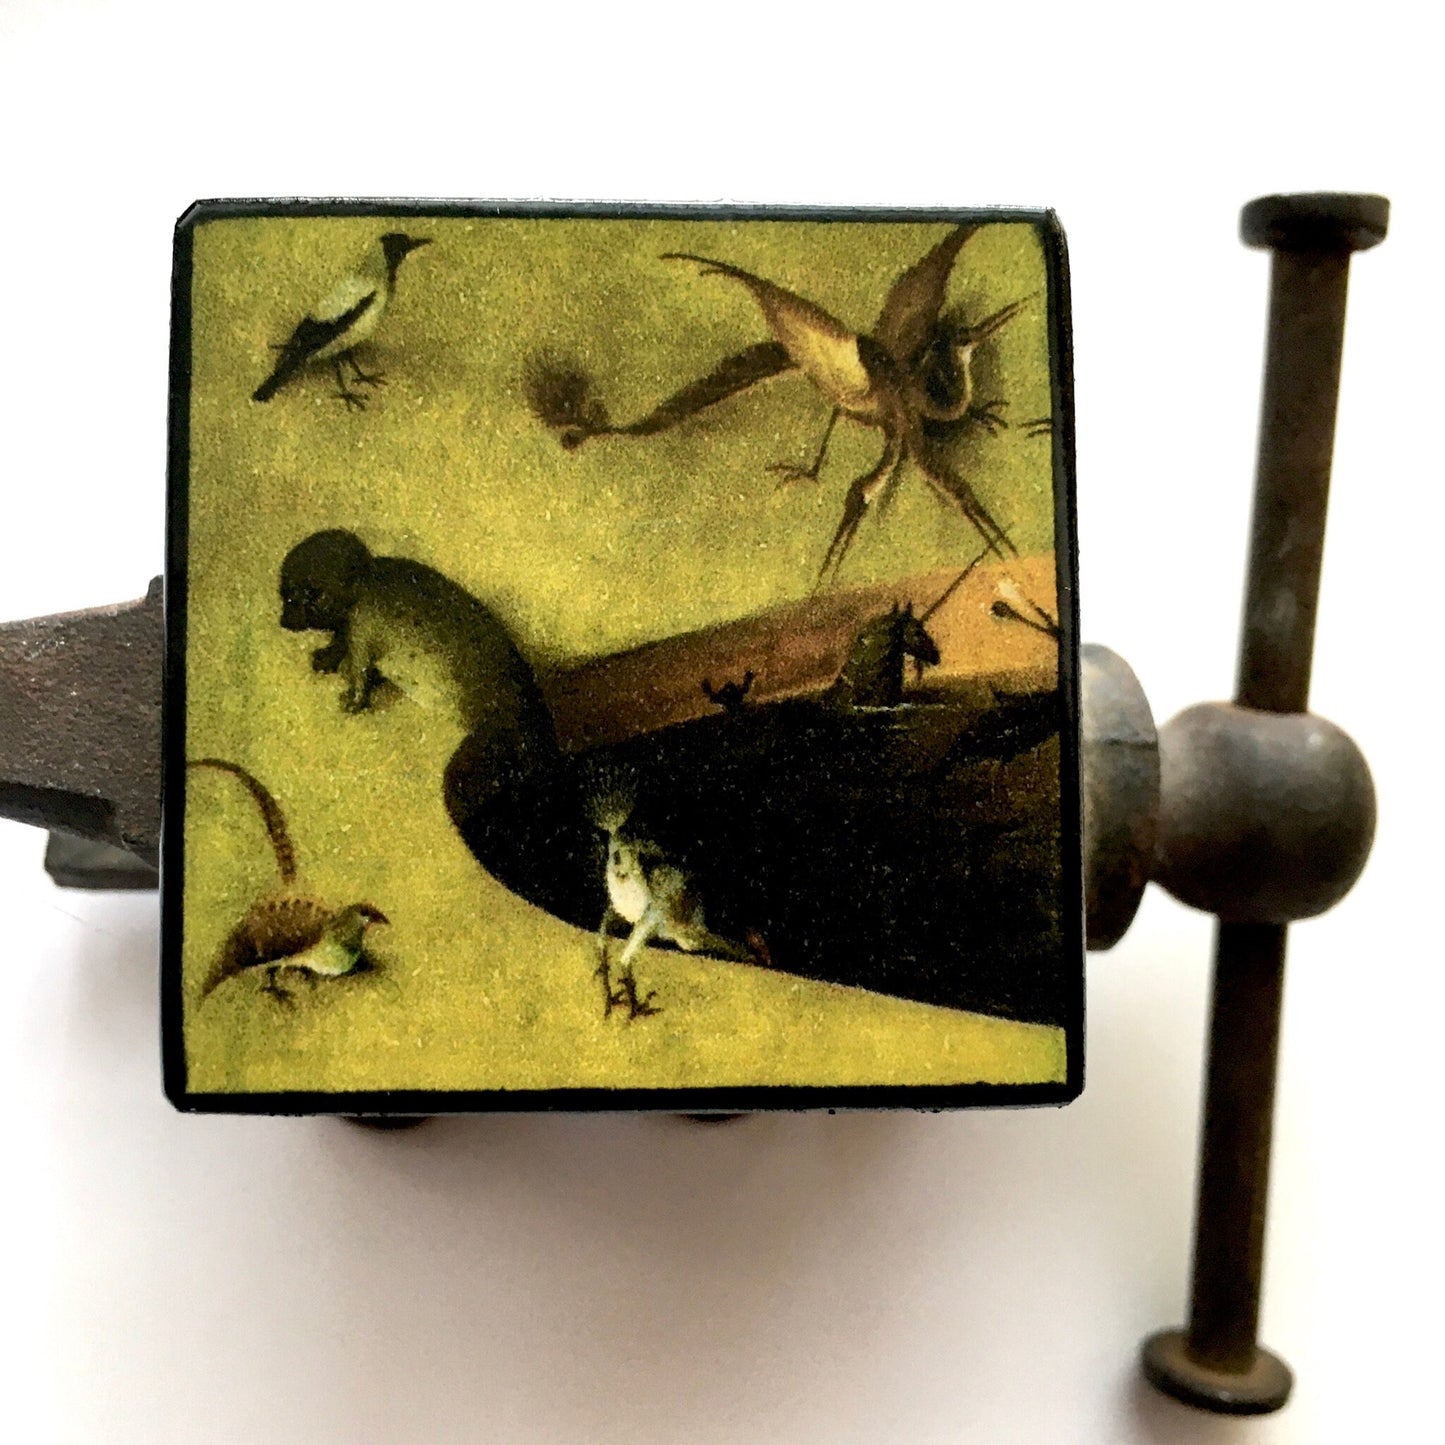 Hieronymus Bosch art inspired brooch for her and him. Sustainable wooden jewellery for an unusual artsy gift. Obljewellery aesthetic, statement, artsy jewellery.